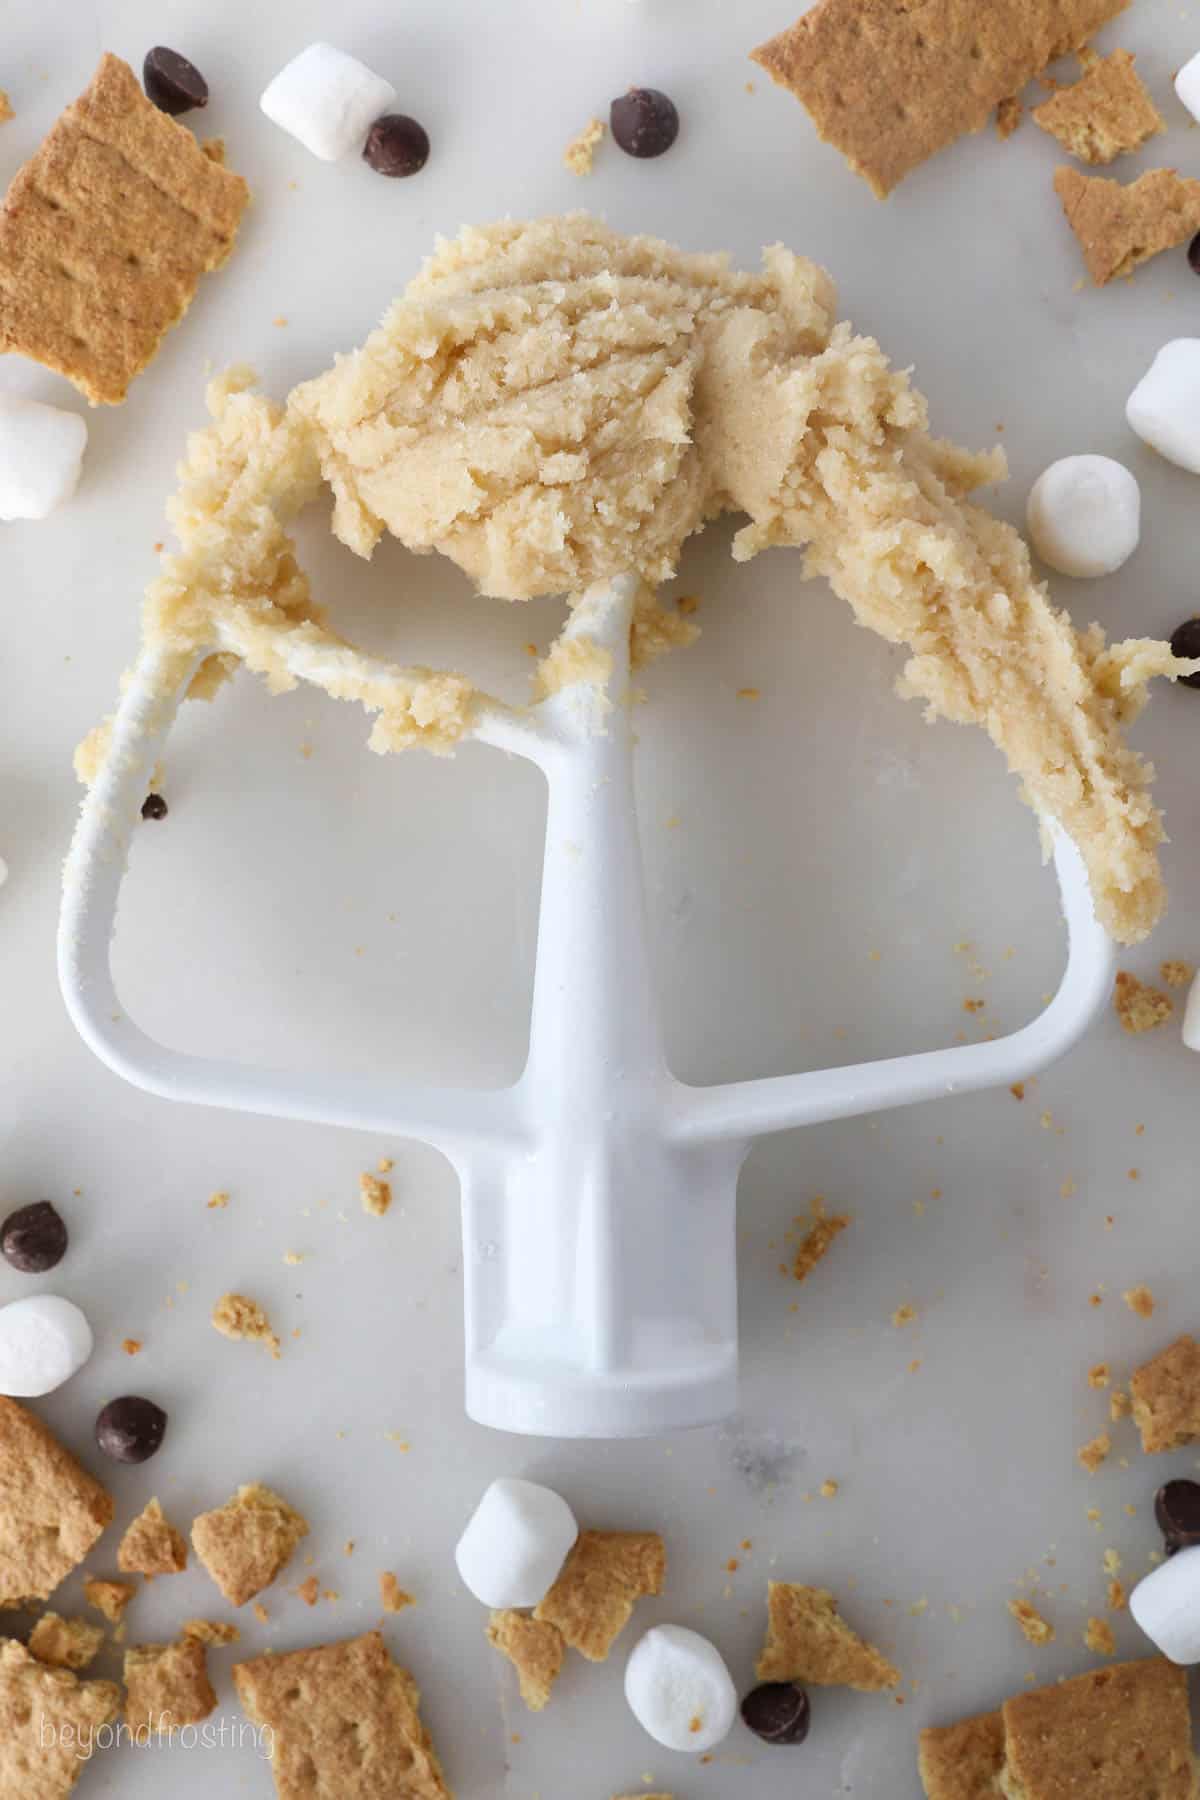 S'mores cookie dough on the end of a stand mixer attachment, resting on a countertop surrounded by scattered crushed graham crackers, marshmallows, and chocolate chips.